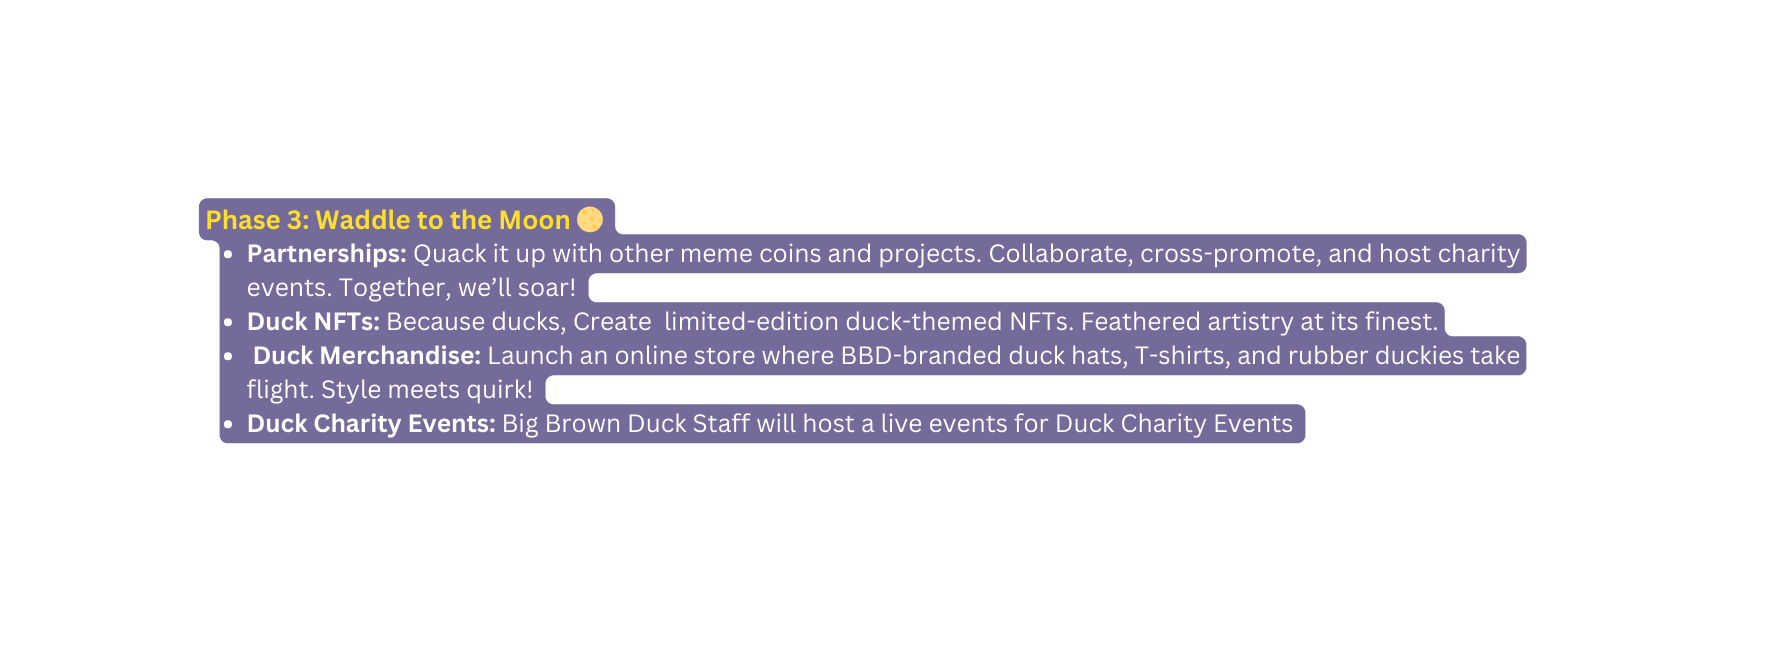 Phase 3 Waddle to the Moon Partnerships Quack it up with other meme coins and projects Collaborate cross promote and host charity events Together we ll soar Duck NFTs Because ducks Create limited edition duck themed NFTs Feathered artistry at its finest Duck Merchandise Launch an online store where BBD branded duck hats T shirts and rubber duckies take flight Style meets quirk Duck Charity Events Big Brown Duck Staff will host a live events for Duck Charity Events